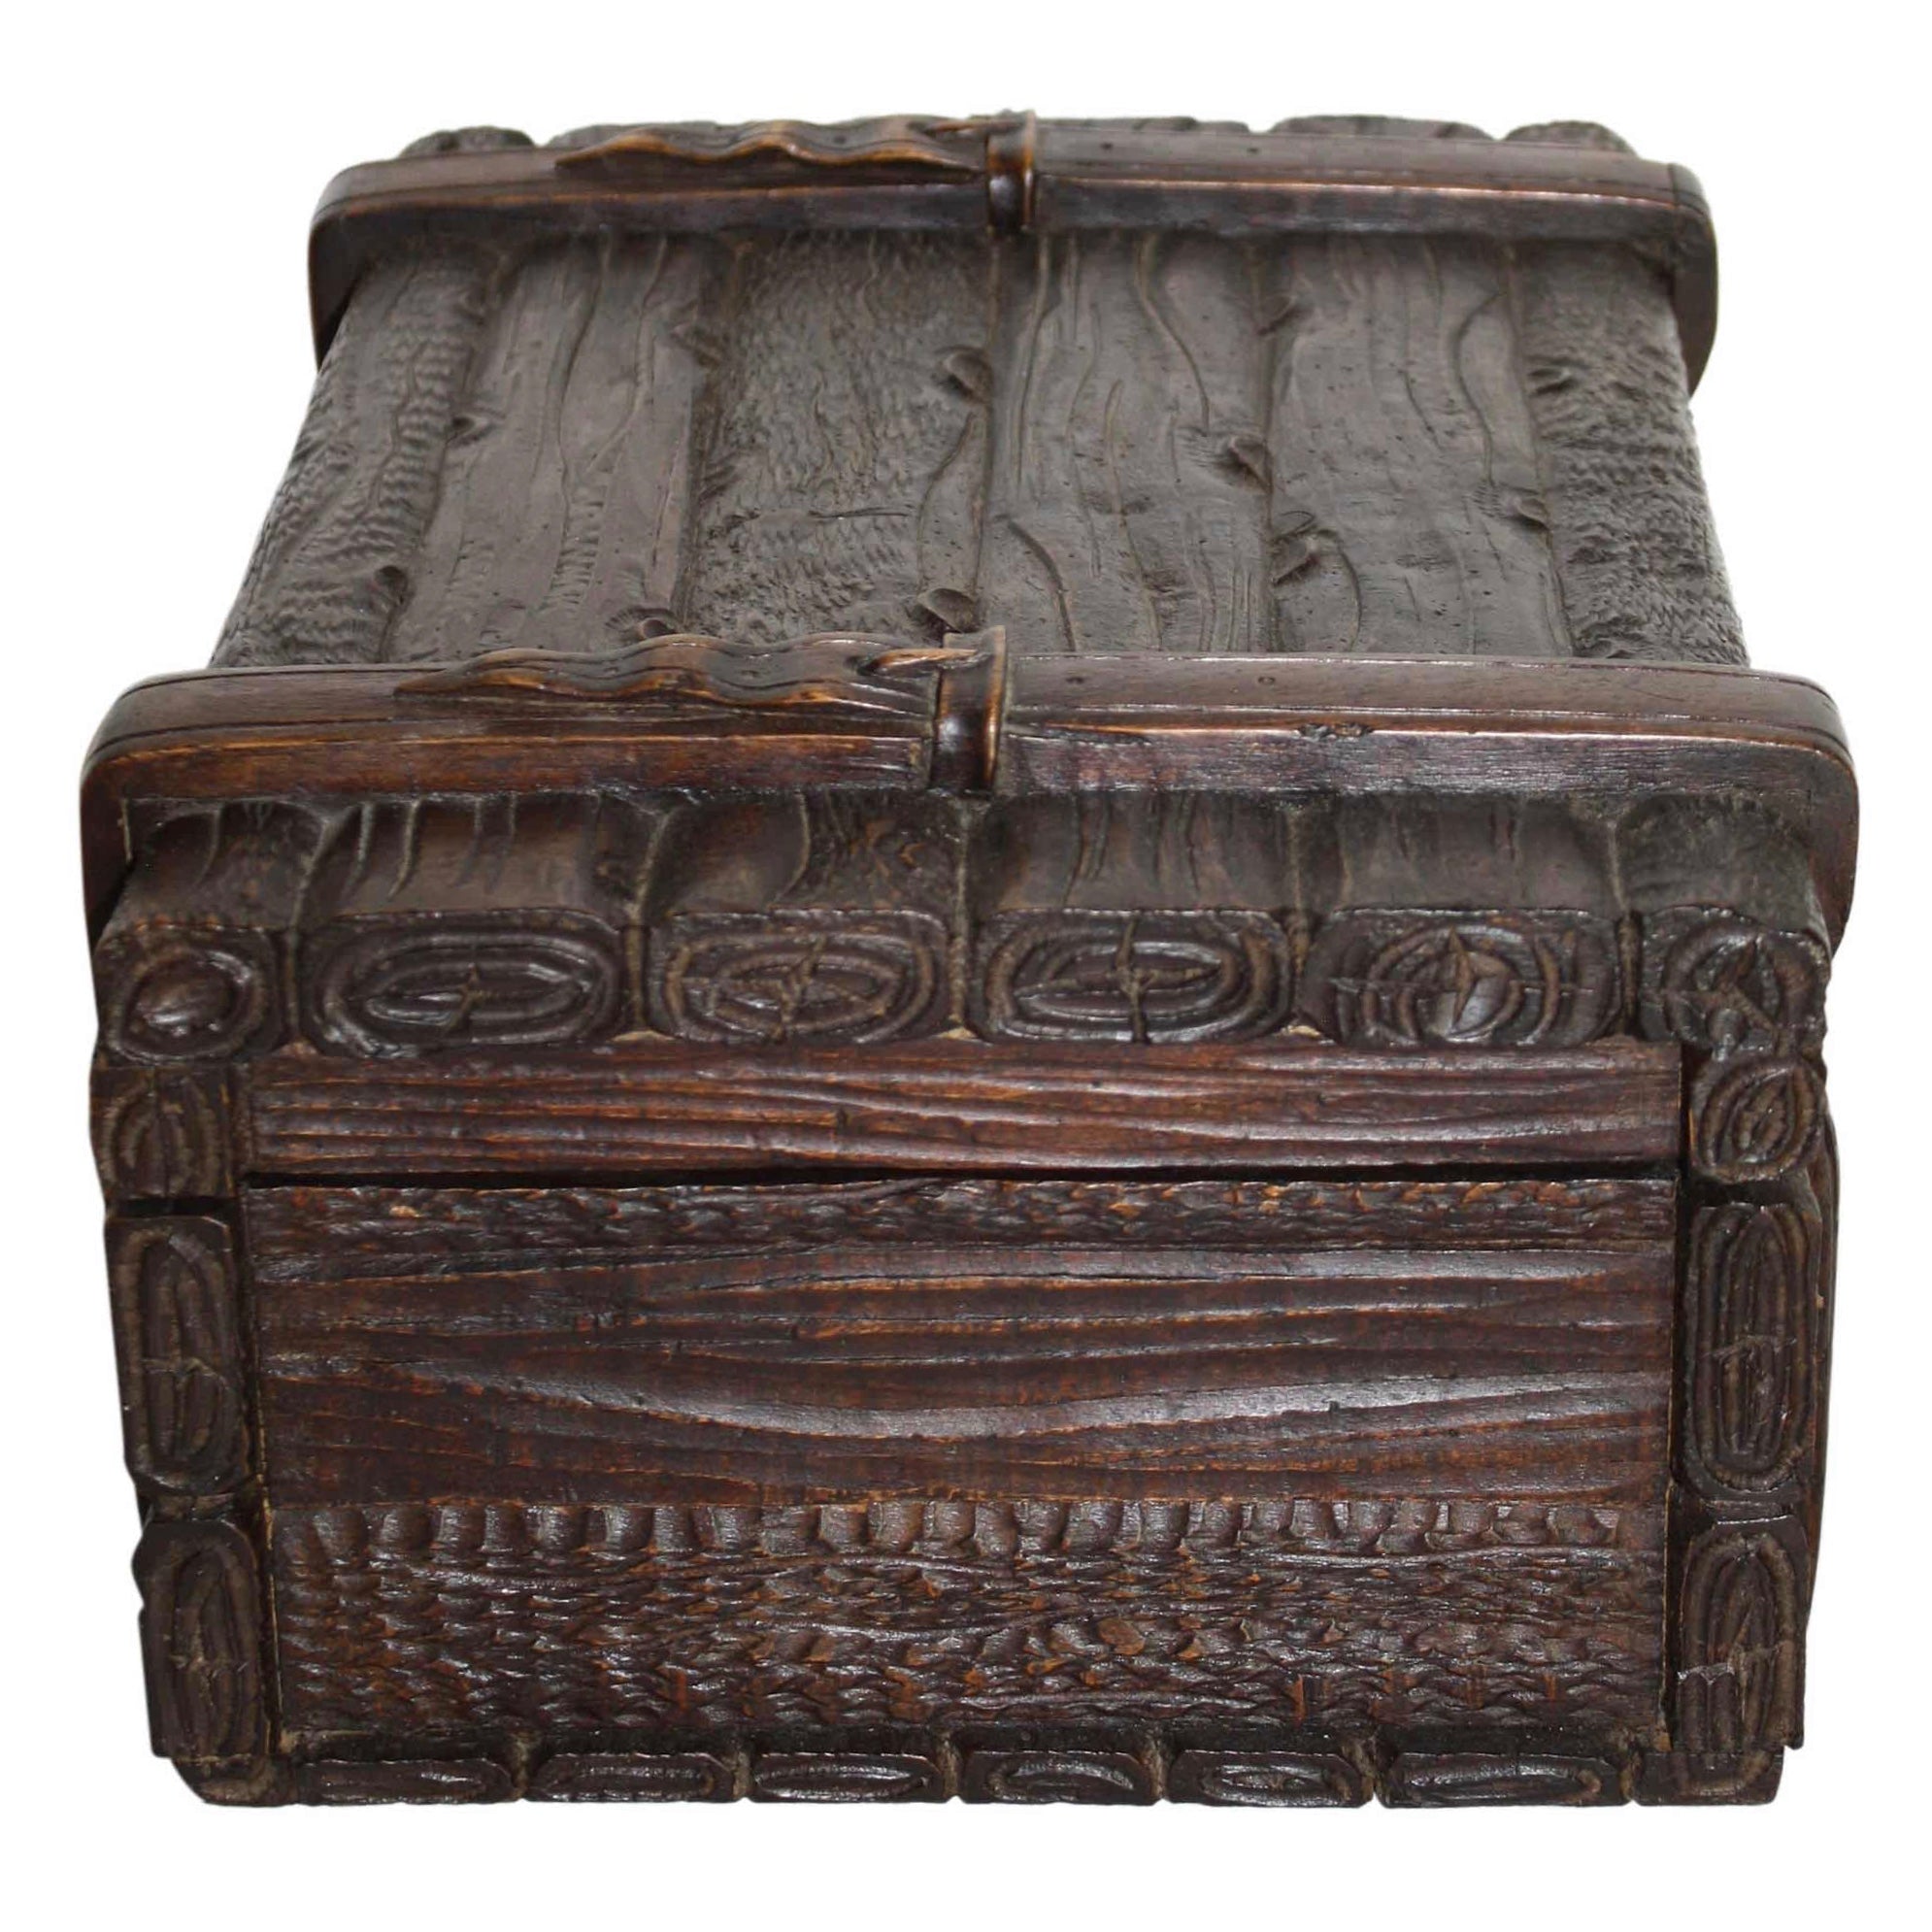 Swiss Black Forest Carved Box